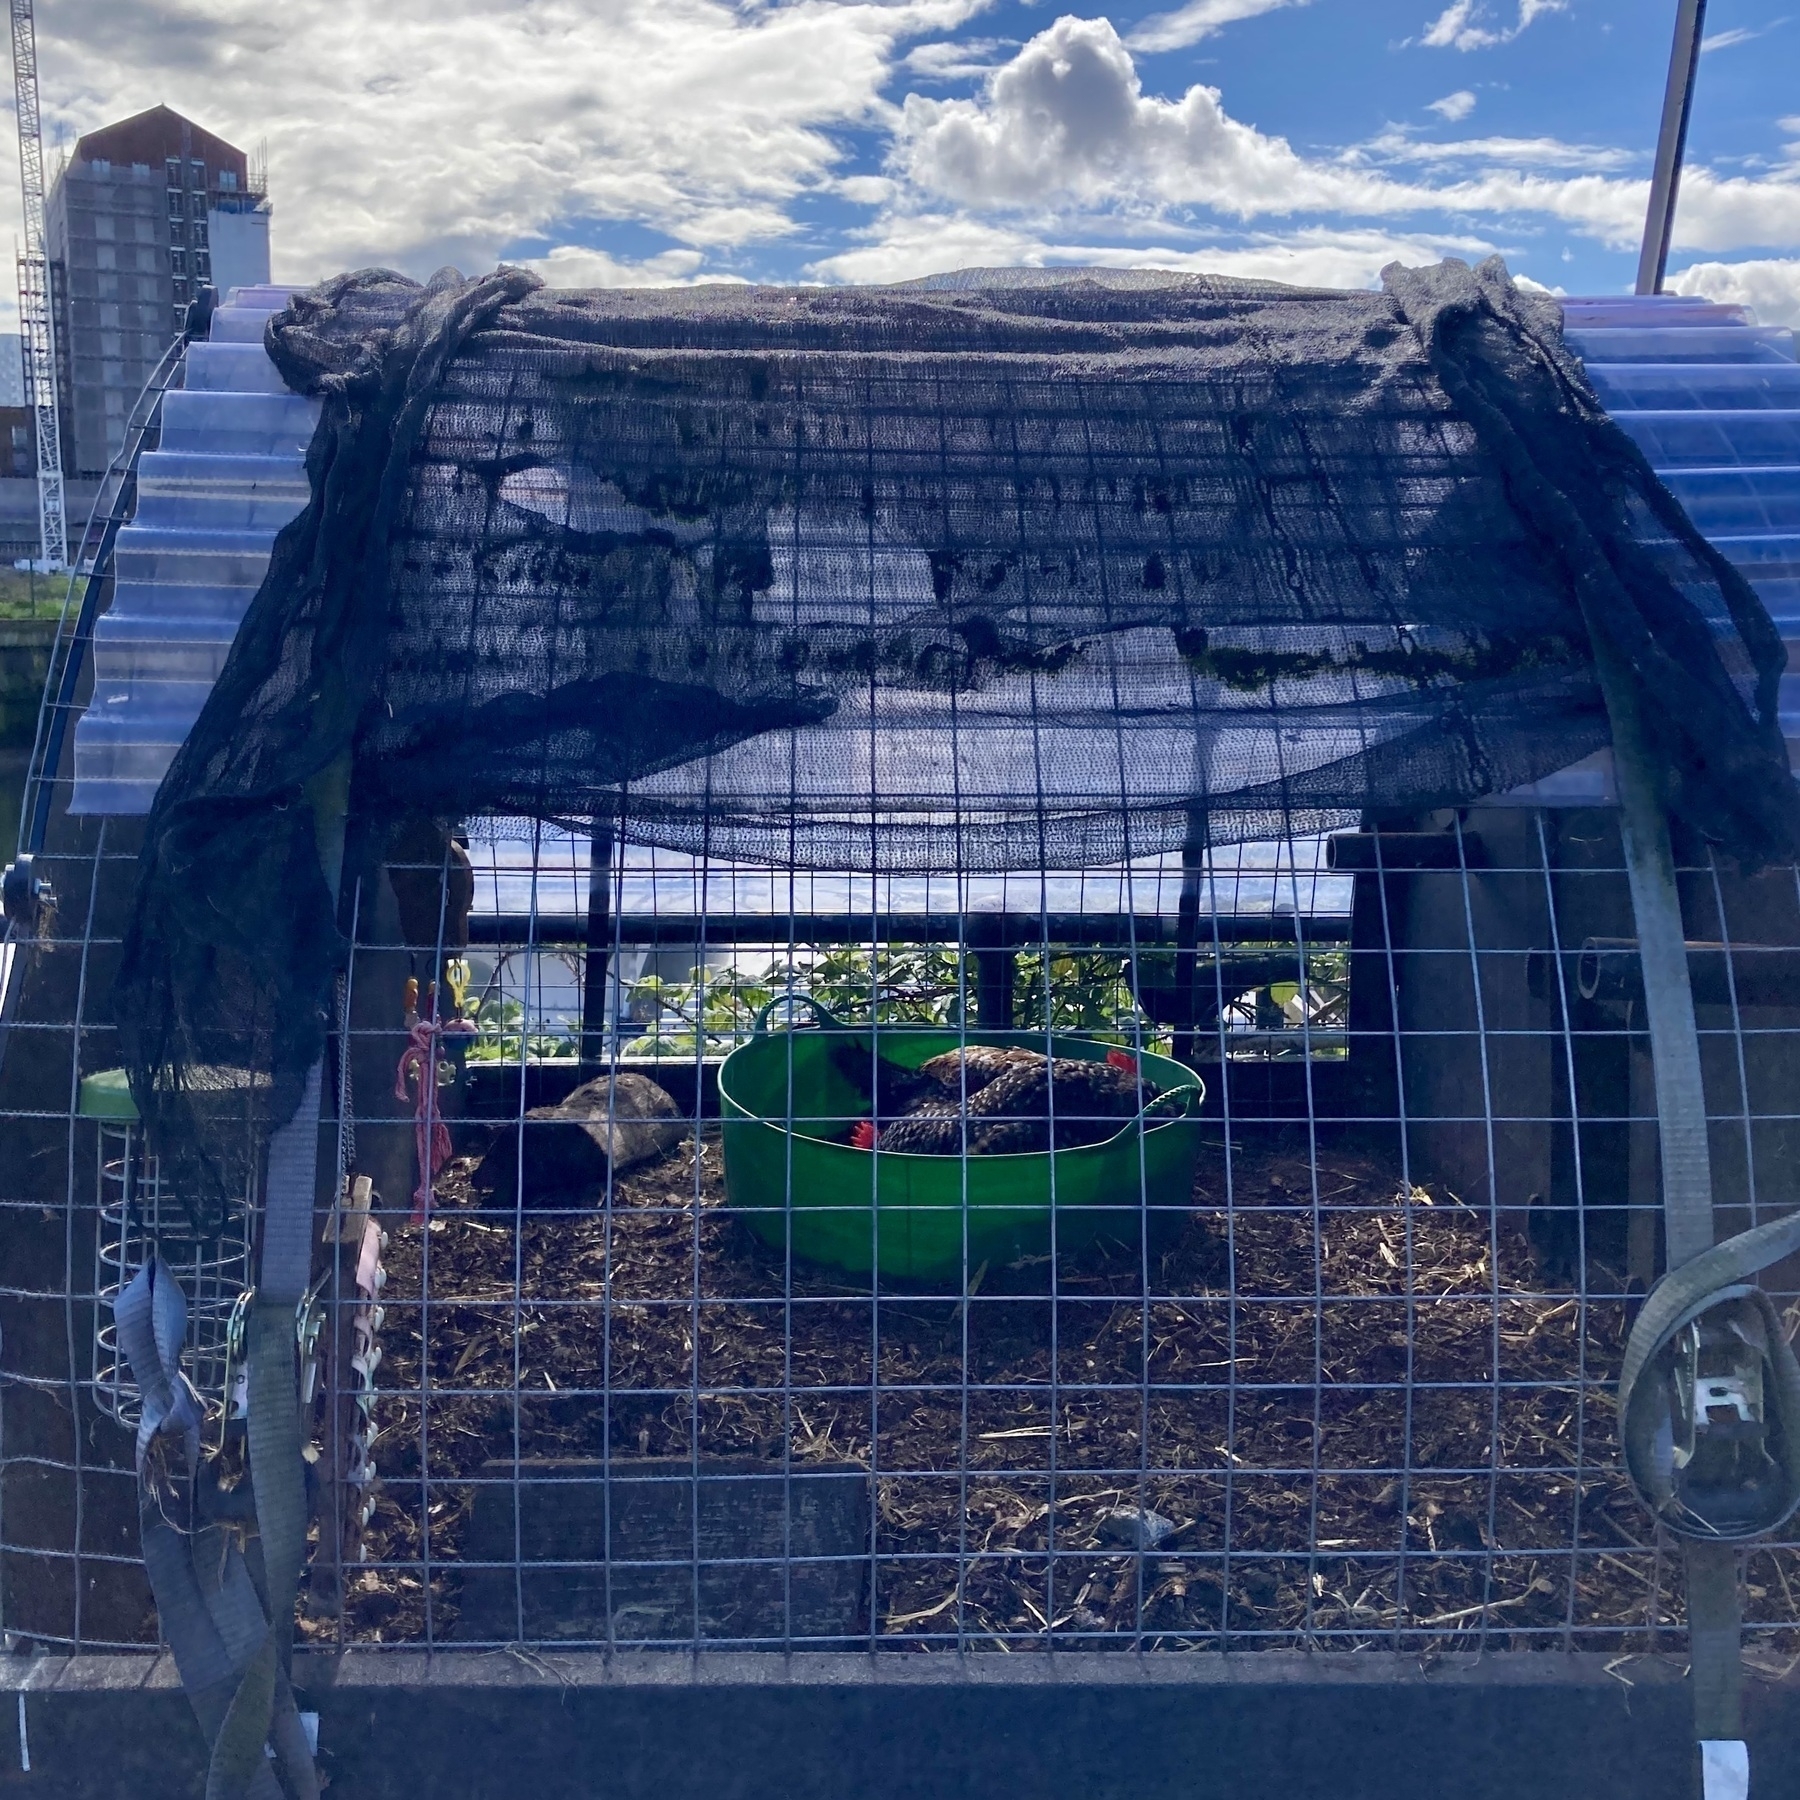 Two speckled hens foraging in a green garden bucket in a coop on the banks of the river Lea against a backdrop of cloudy blue sky and a construction site